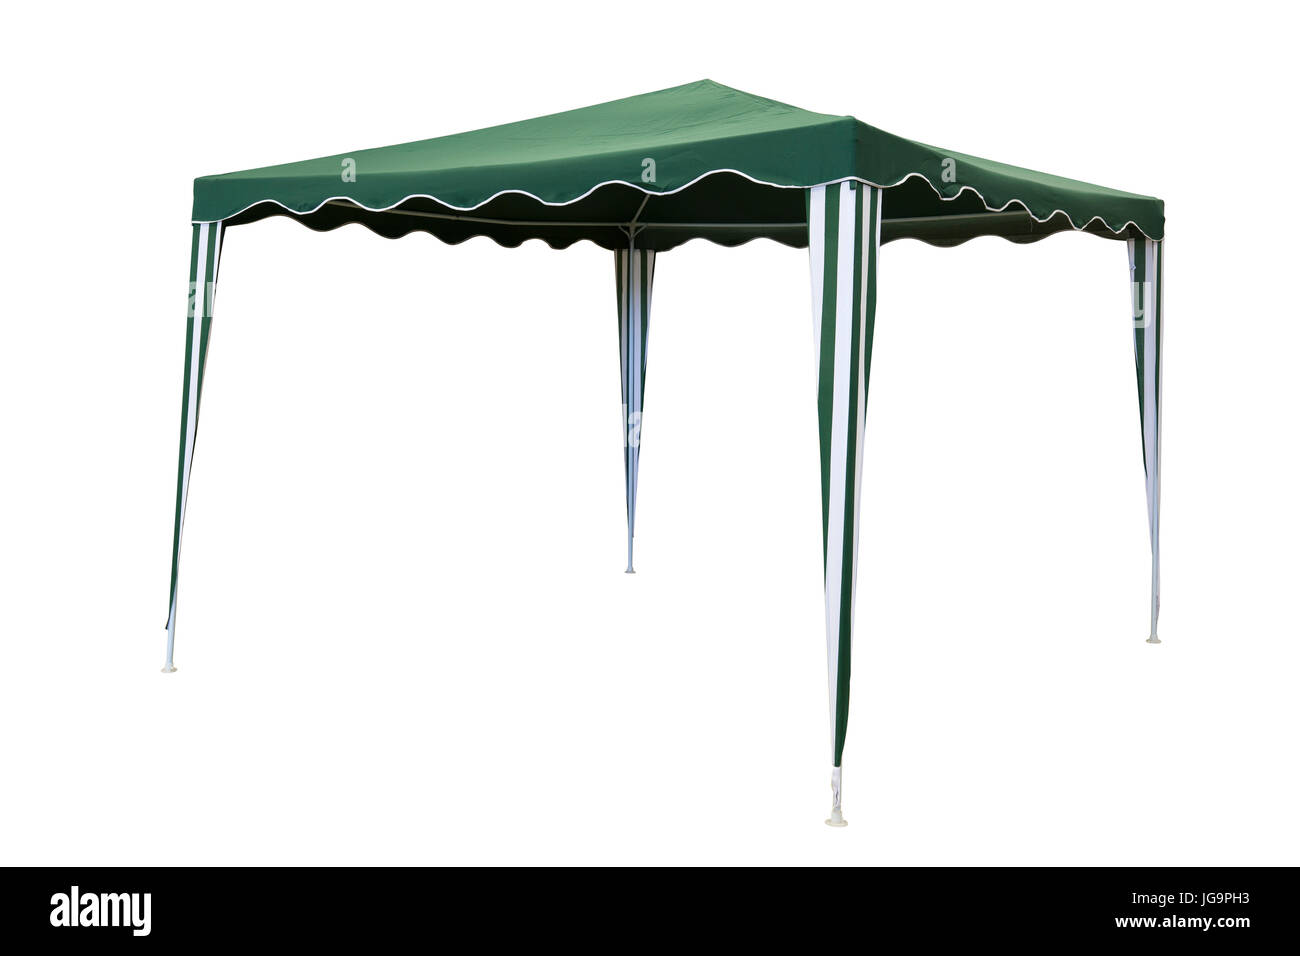 Rain end sun protection garden folding tent. Isolated on white with clipping path. Stock Photo